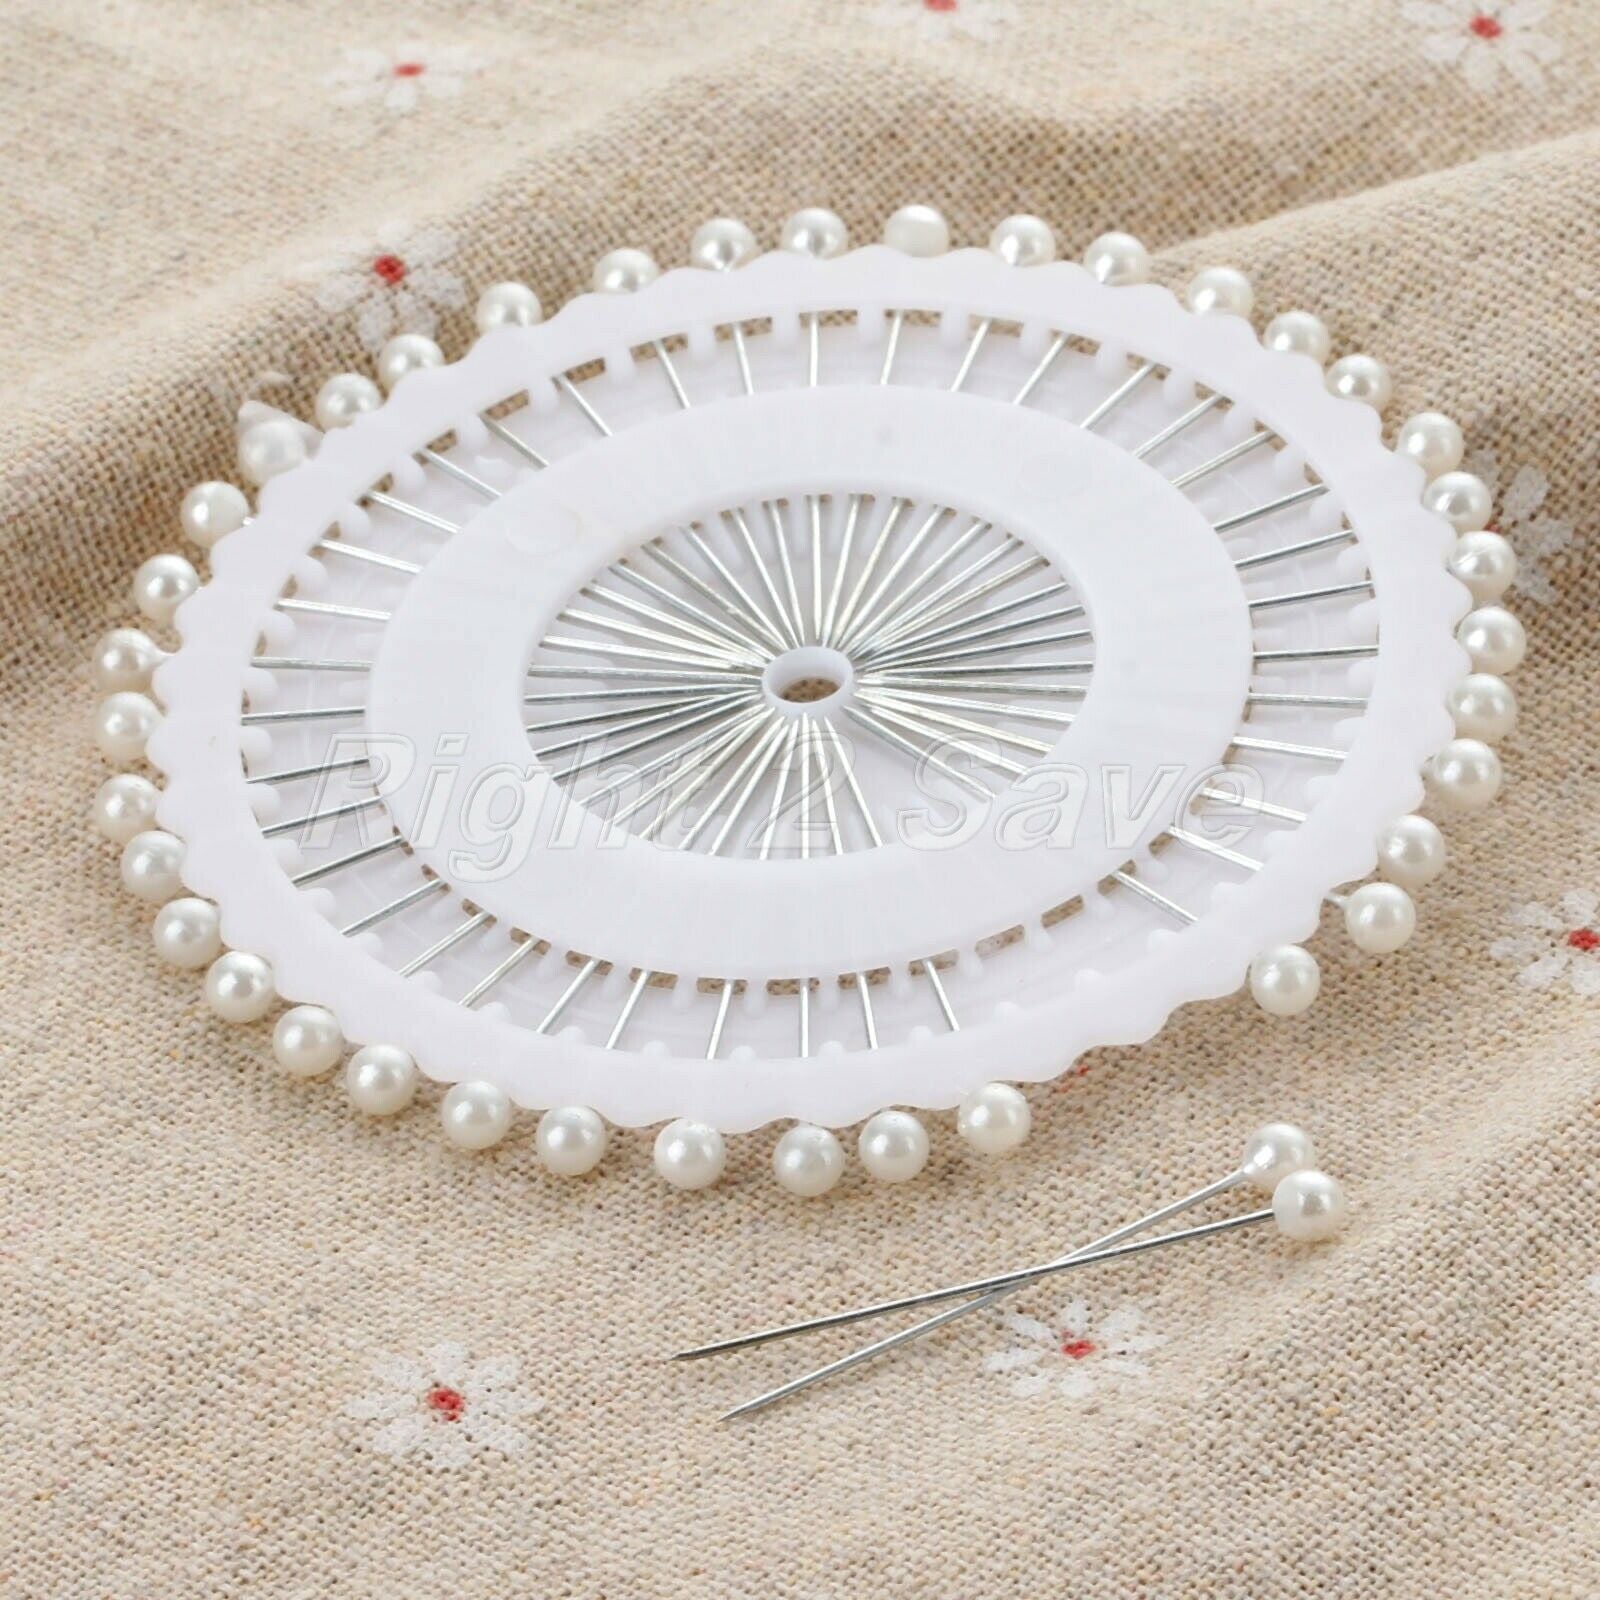 40Pcs White Round Head Dressmaking Pins Wedding Corsage Florists Sewing Tool